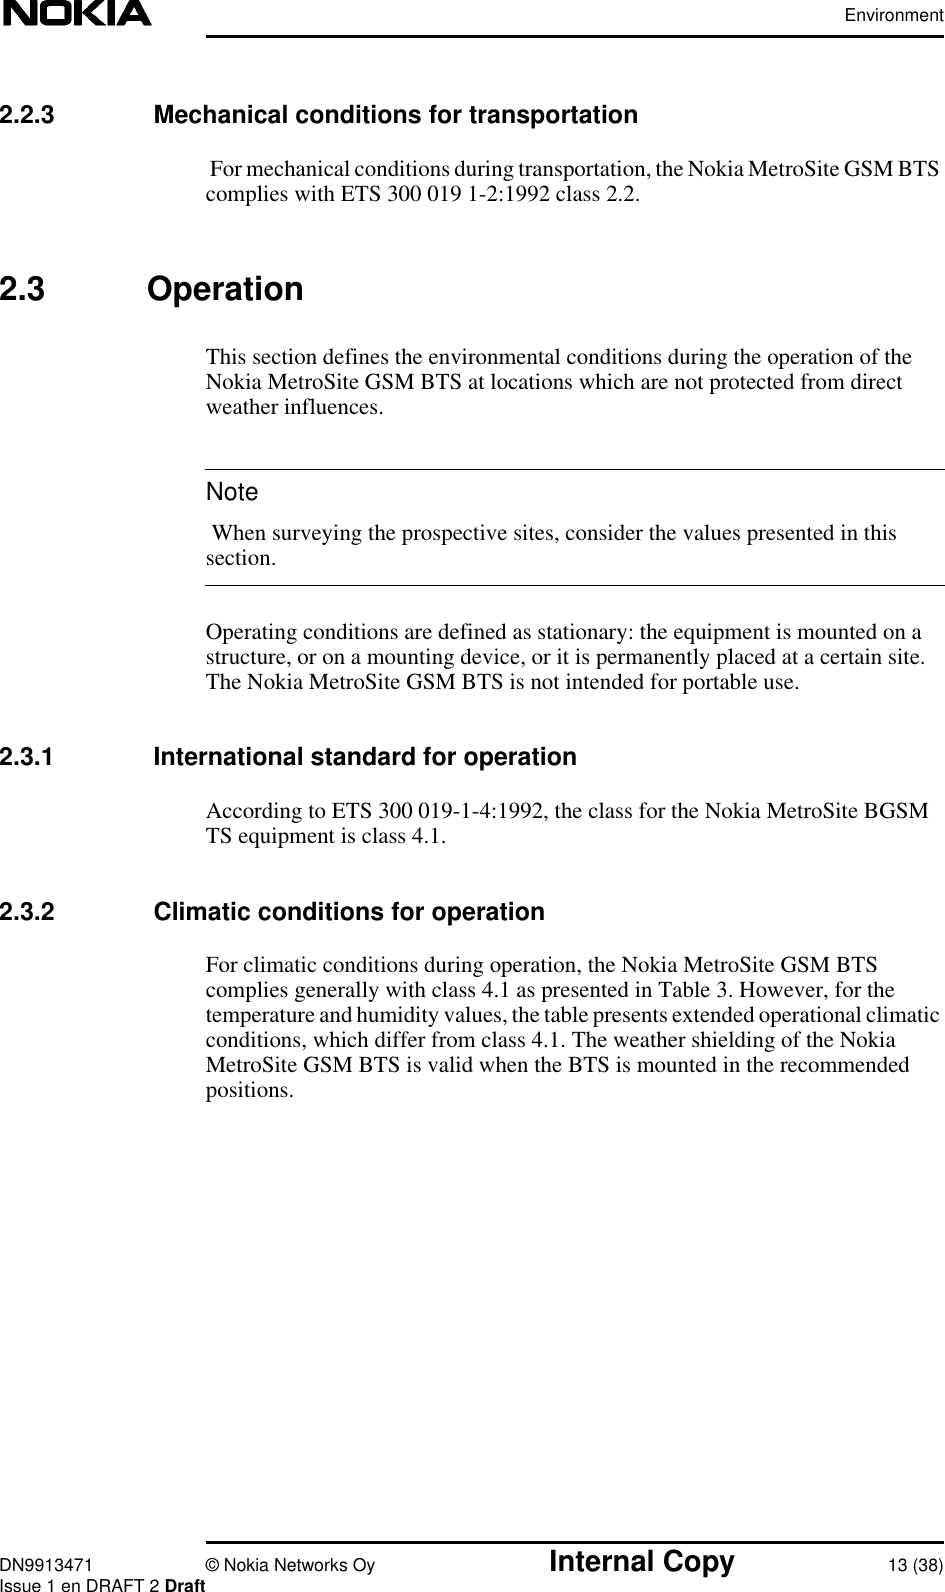 EnvironmentDN9913471 © Nokia Networks Oy Internal Copy 13 (38)Issue 1 en DRAFT 2 DraftNote2.2.3  Mechanical conditions for transportationFor mechanical conditions during transportation, the Nokia MetroSite GSM BTScomplies with ETS 300 019 1-2:1992 class 2.2.2.3 OperationThis section defines the environmental conditions during the operation of theNokia MetroSite GSM BTS at locations which are not protected from directweather influences. When surveying the prospective sites, consider the values presented in thissection.Operating conditions are defined as stationary: the equipment is mounted on astructure, or on a mounting device, or it is permanently placed at a certain site.The Nokia MetroSite GSM BTS is not intended for portable use.2.3.1  International standard for operationAccording to ETS 300 019-1-4:1992, the class for the Nokia MetroSite BGSMTS equipment is class 4.1.2.3.2  Climatic conditions for operationFor climatic conditions during operation, the Nokia MetroSite GSM BTScomplies generally with class 4.1 as presented in Table 3. However, for thetemperature and humidity values, the table presents extended operational climaticconditions, which differ from class 4.1. The weather shielding of the NokiaMetroSite GSM BTS is valid when the BTS is mounted in the recommendedpositions.